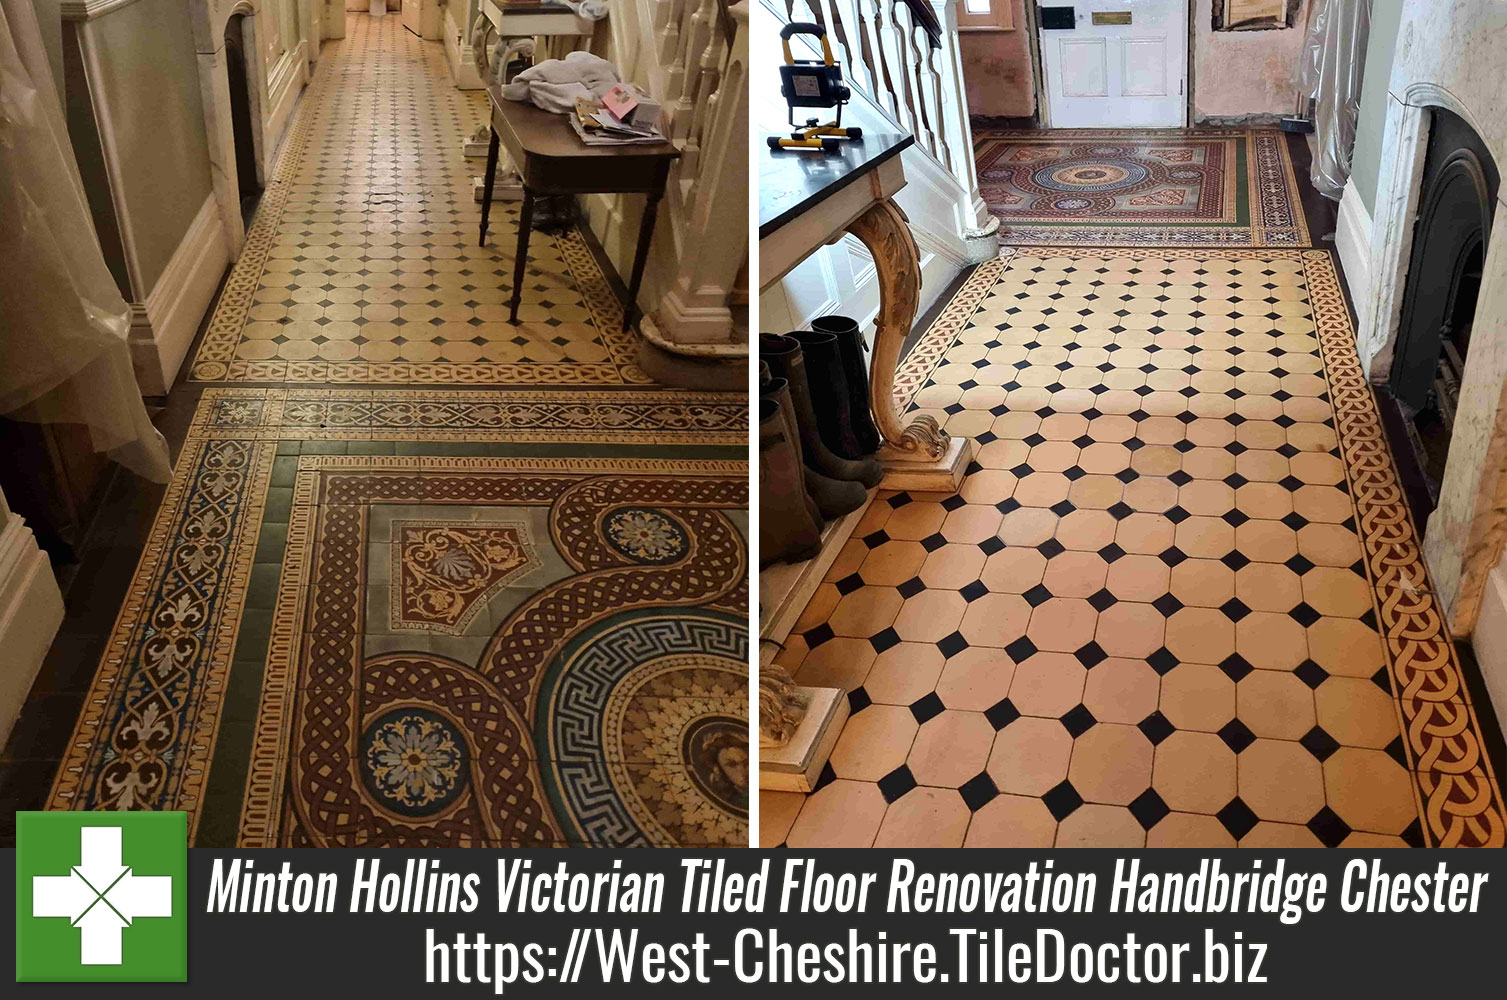 Using Tile Doctor Neutral Tile Cleaner for the cleaning of an 1850’s Minton Tiled floor in Chester